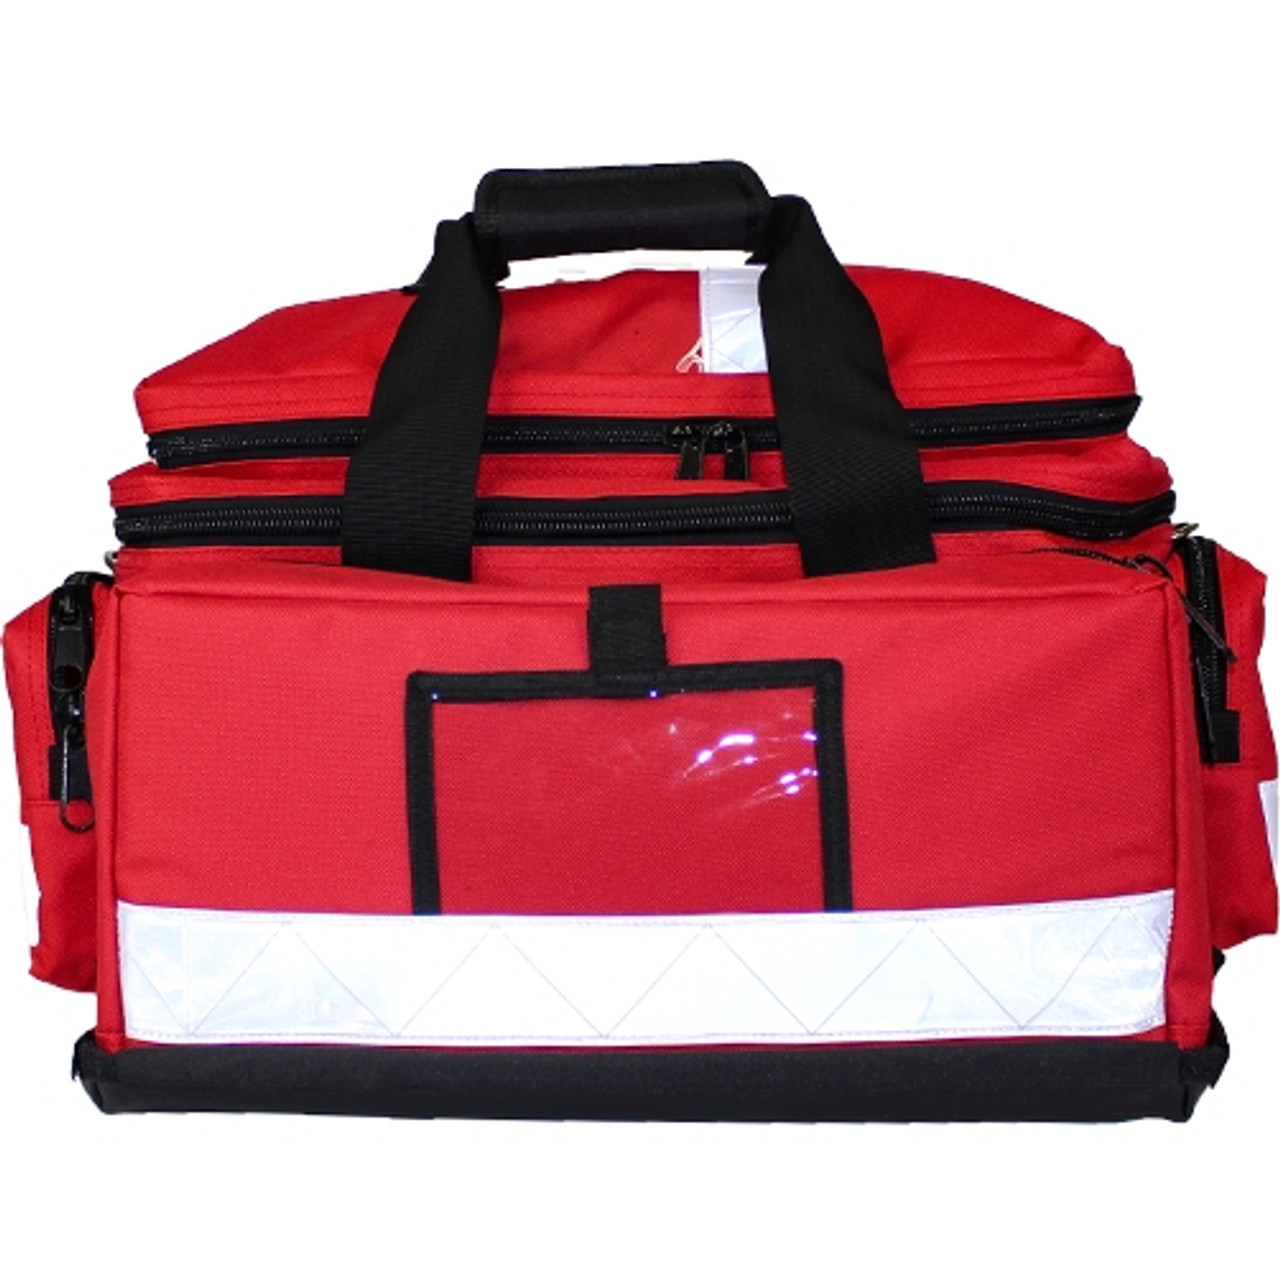 Red Softpack First Aid Bag Trauma 49 x 30 x 28.5cm - Melbourne Office ...